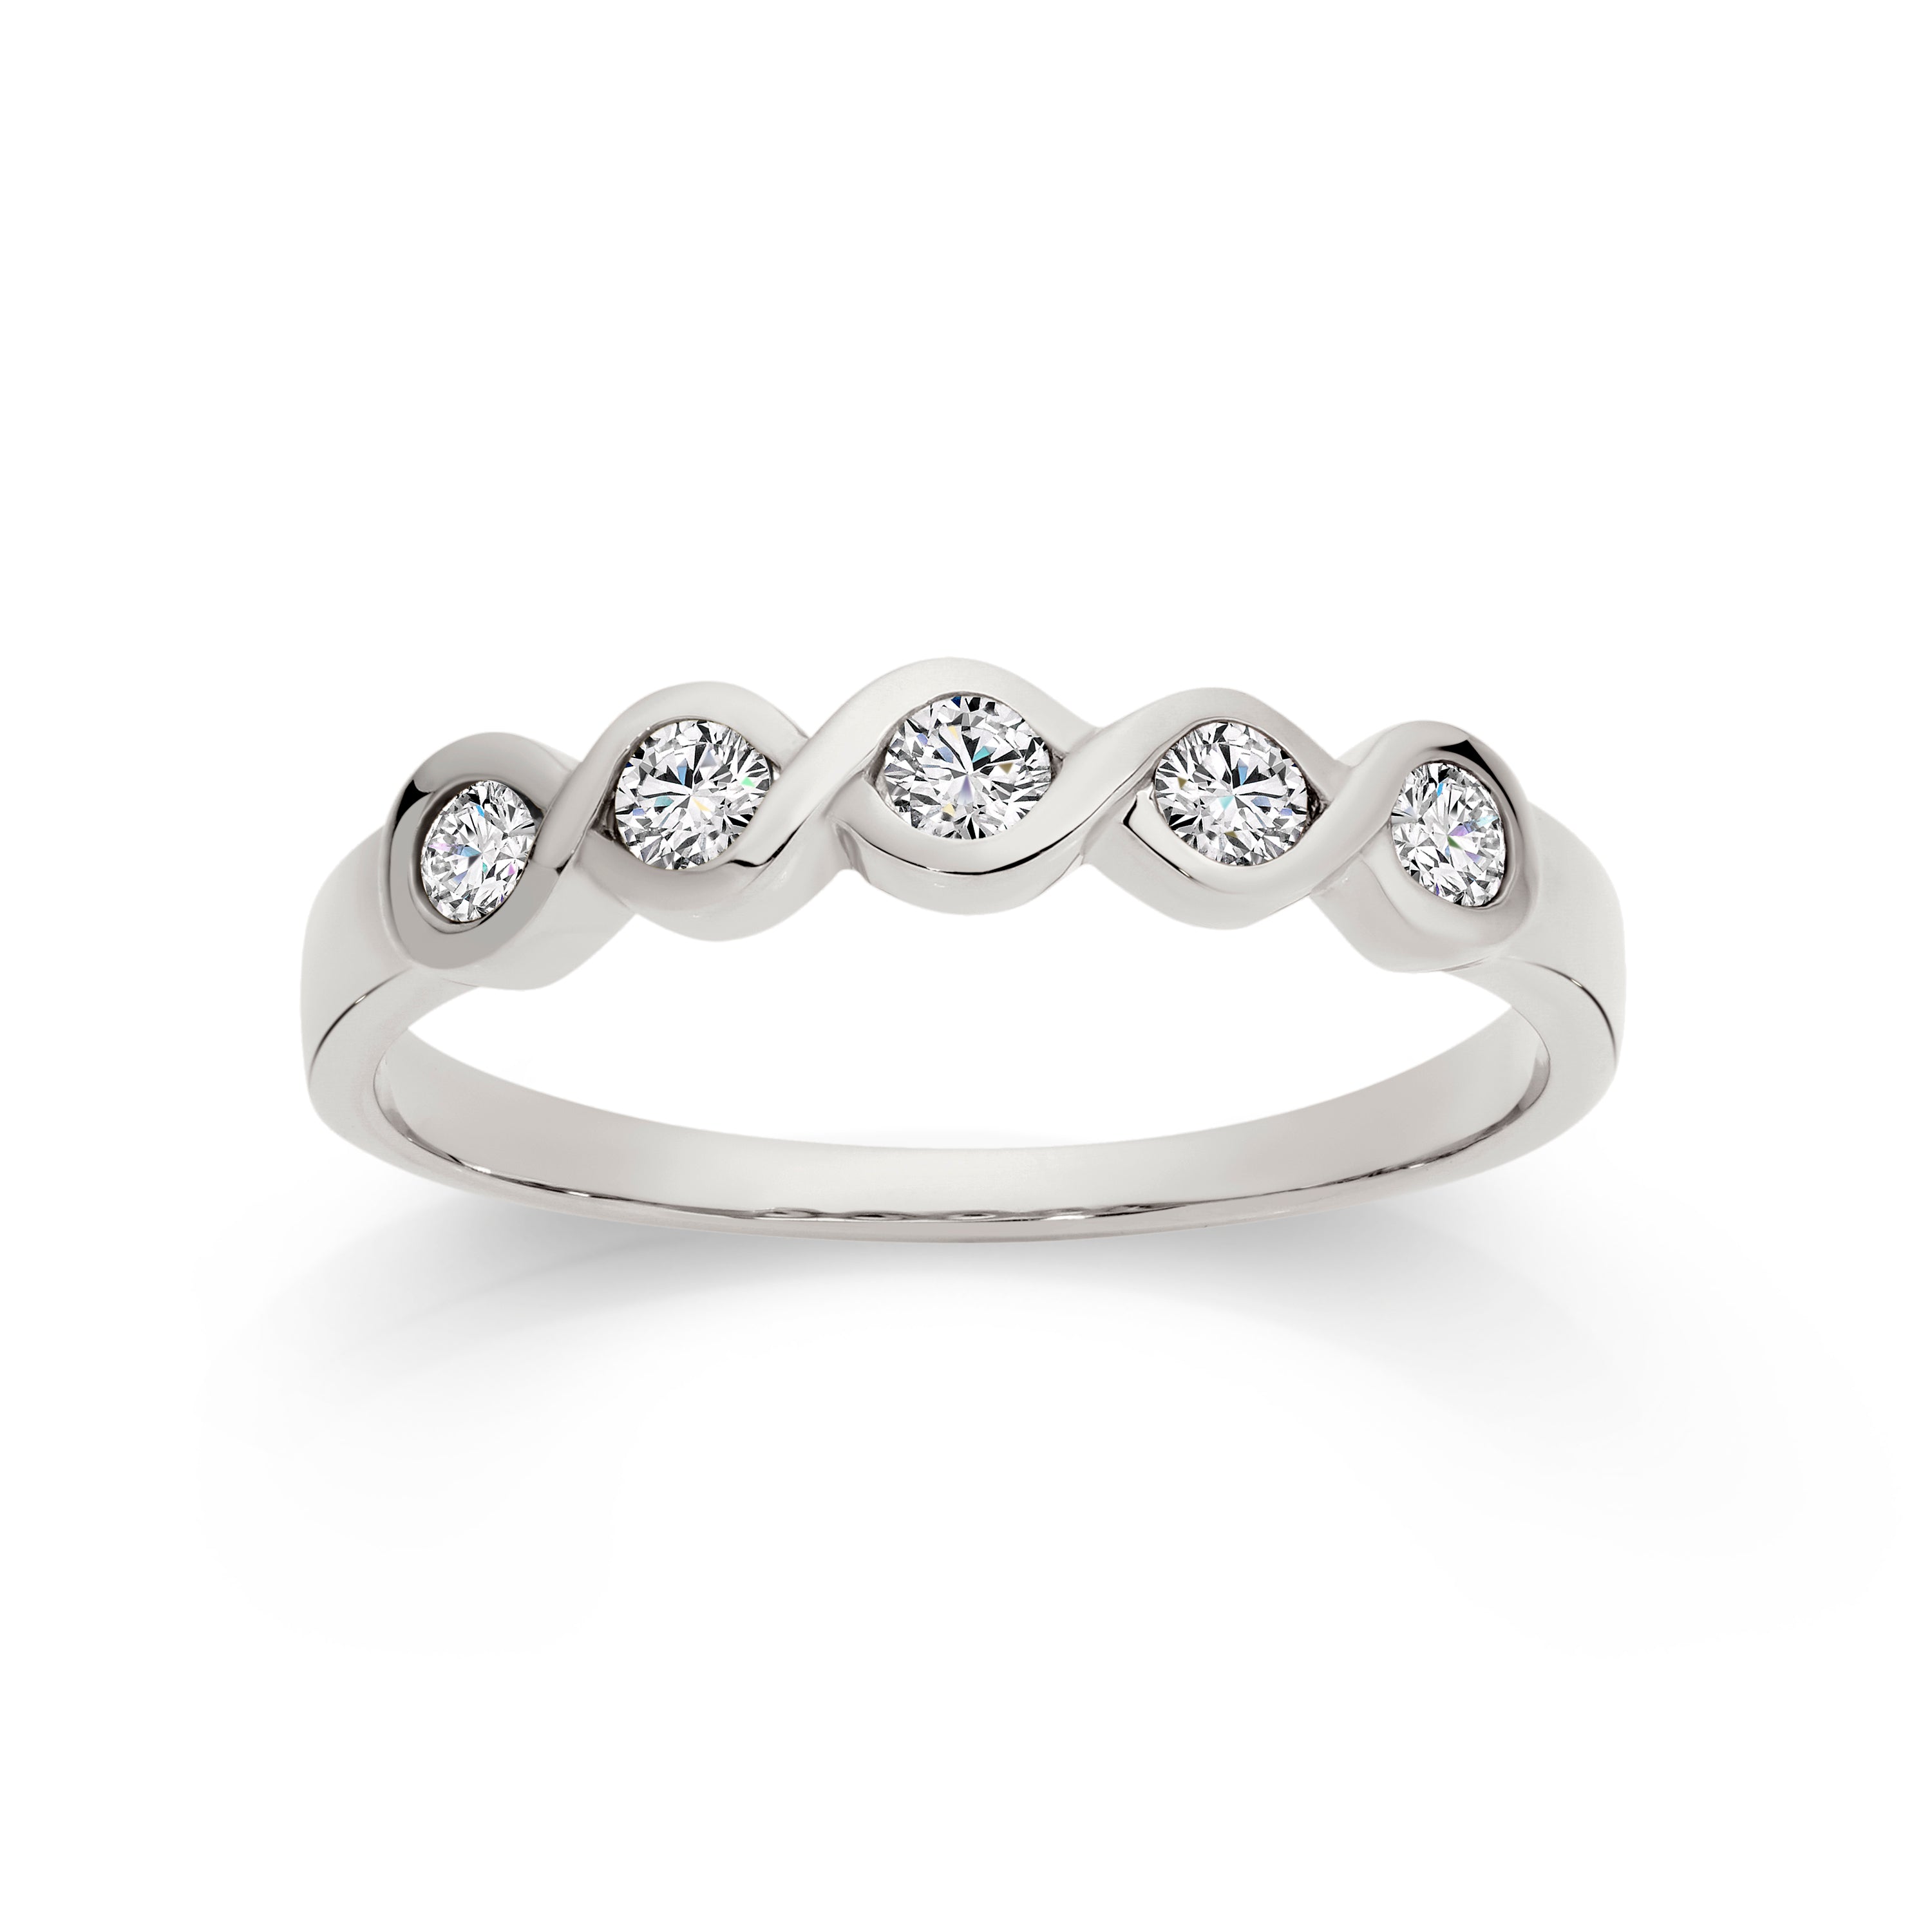 9ct white gold cubic zirconia ring